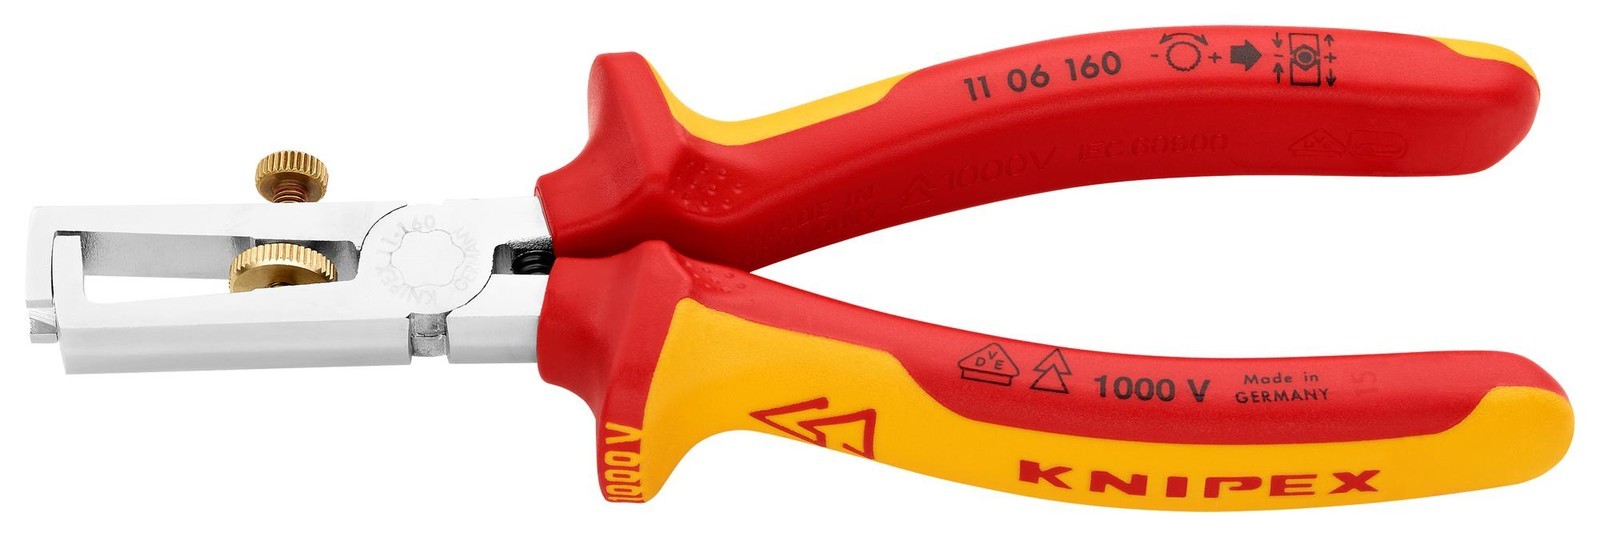 Knipex 11 06 160 Wire Stripping Plier